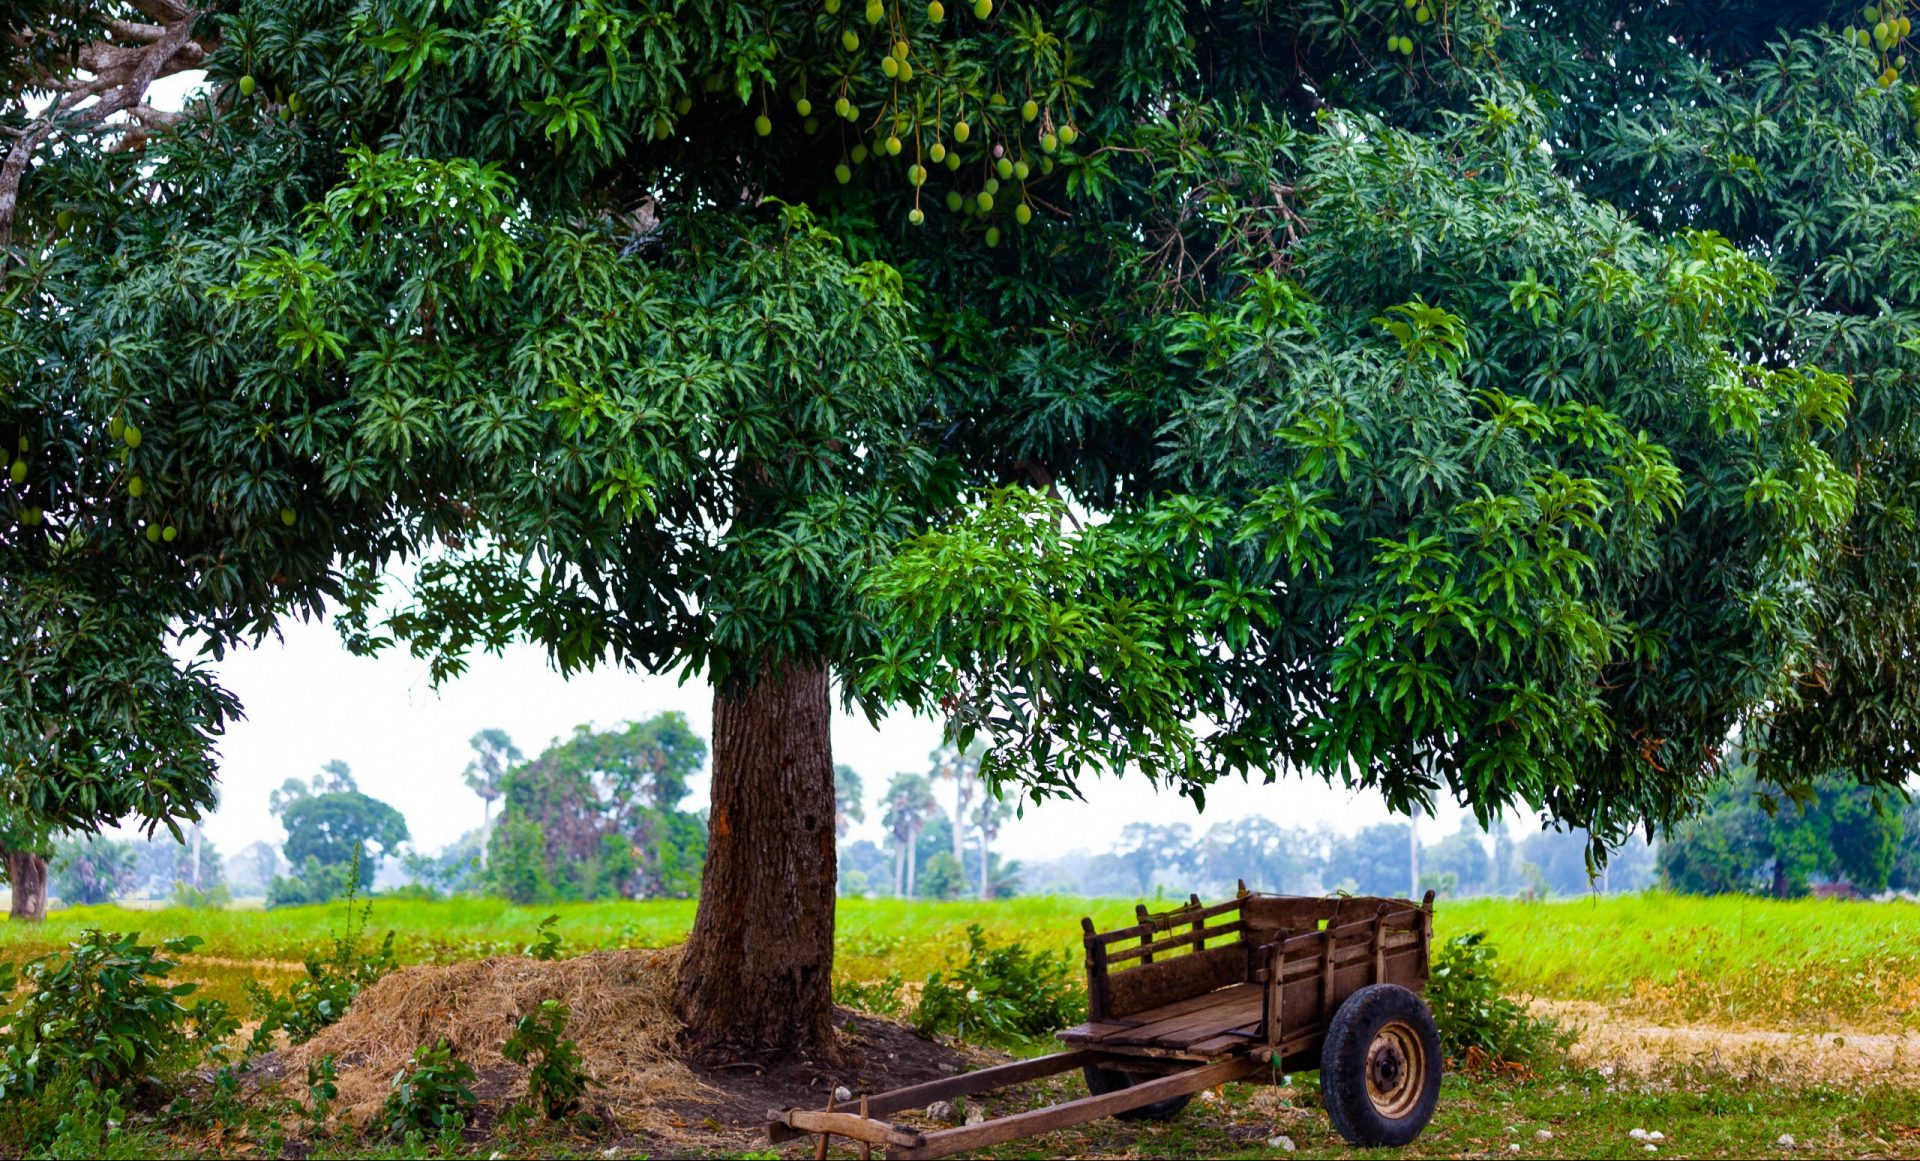 Big green tree and a wooden wagon below the tree